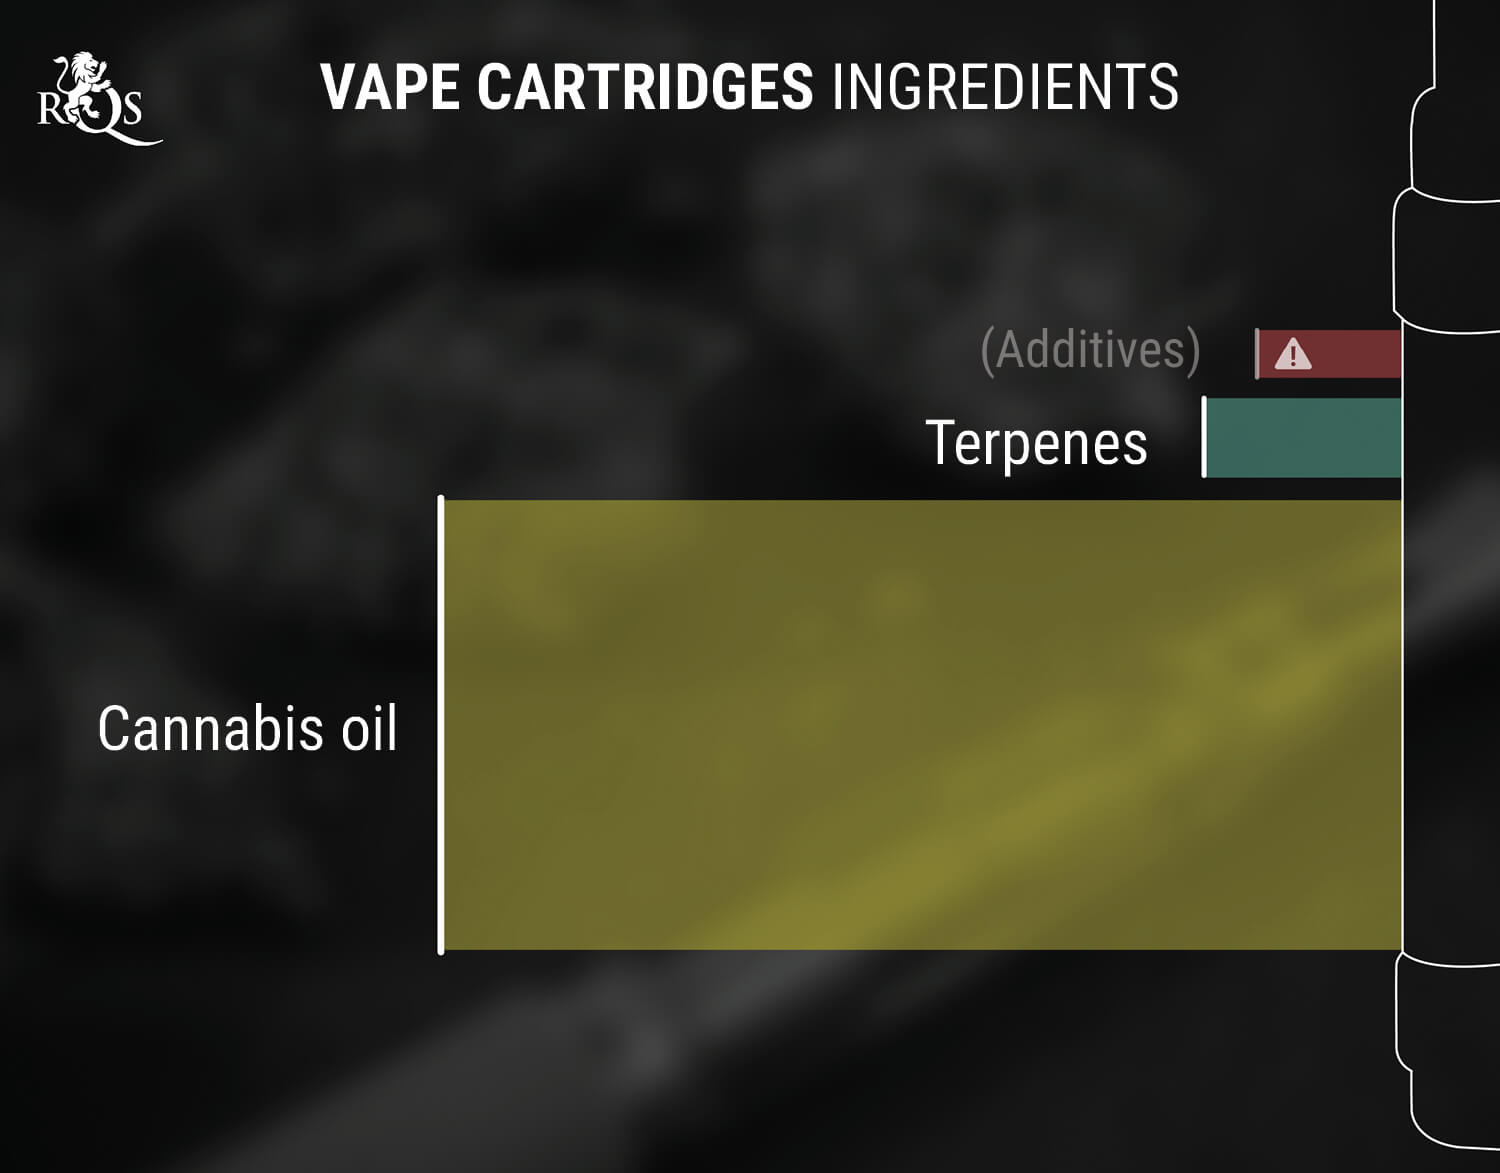 What Are Vape Cartridges?